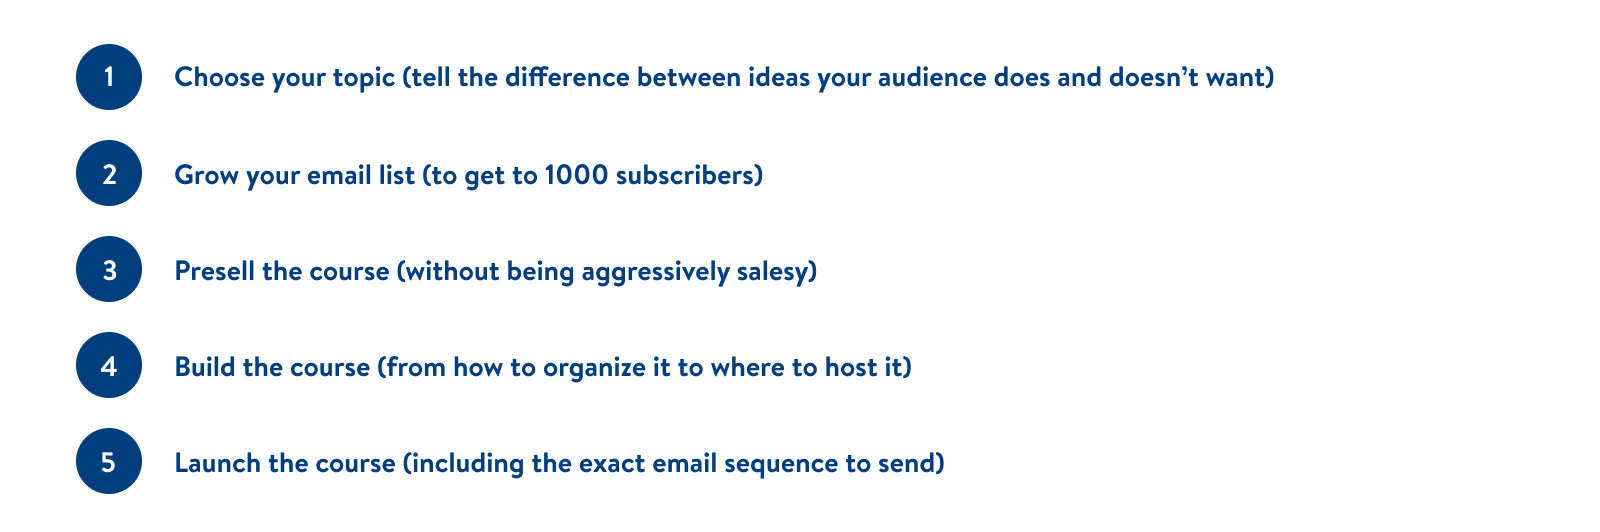 (1) Choose your topic - tell the difference between ideas your audience does and doesn't want (2) Grow your email list to get to 1000 subscribers (3) Presell the course without being agressively salesy (4) Build the course - from how to organize it to where to host it (5) Launch the course - including the exact email sequence to send